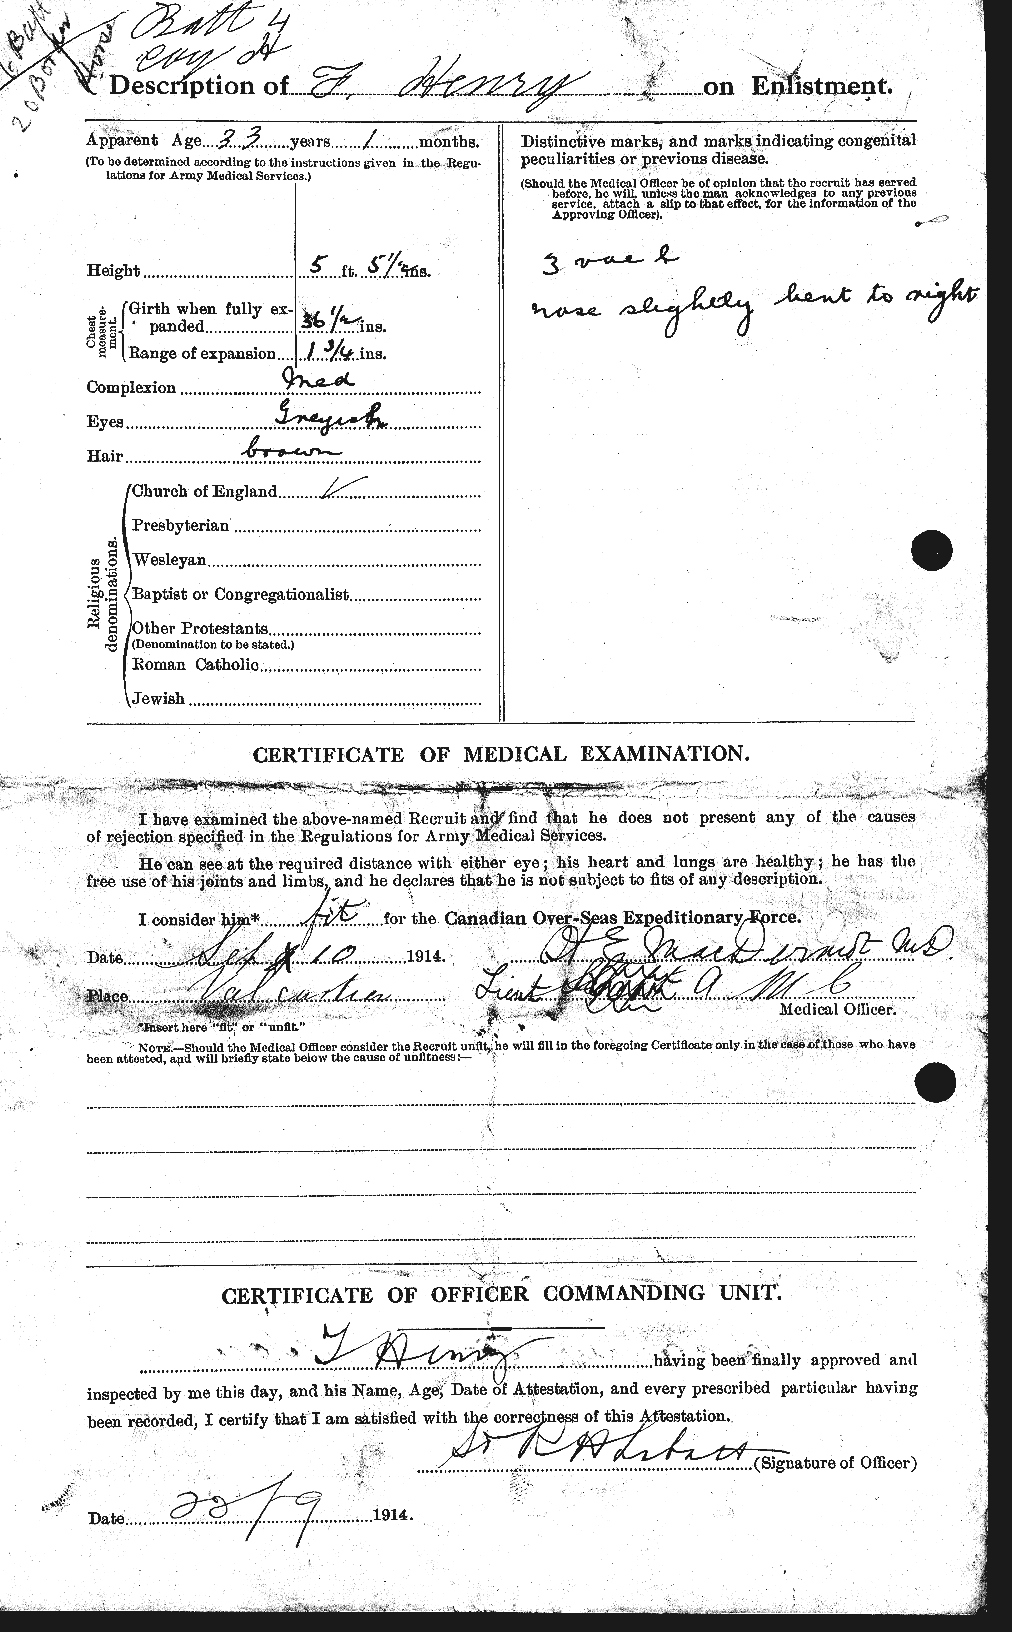 Personnel Records of the First World War - CEF 392853b